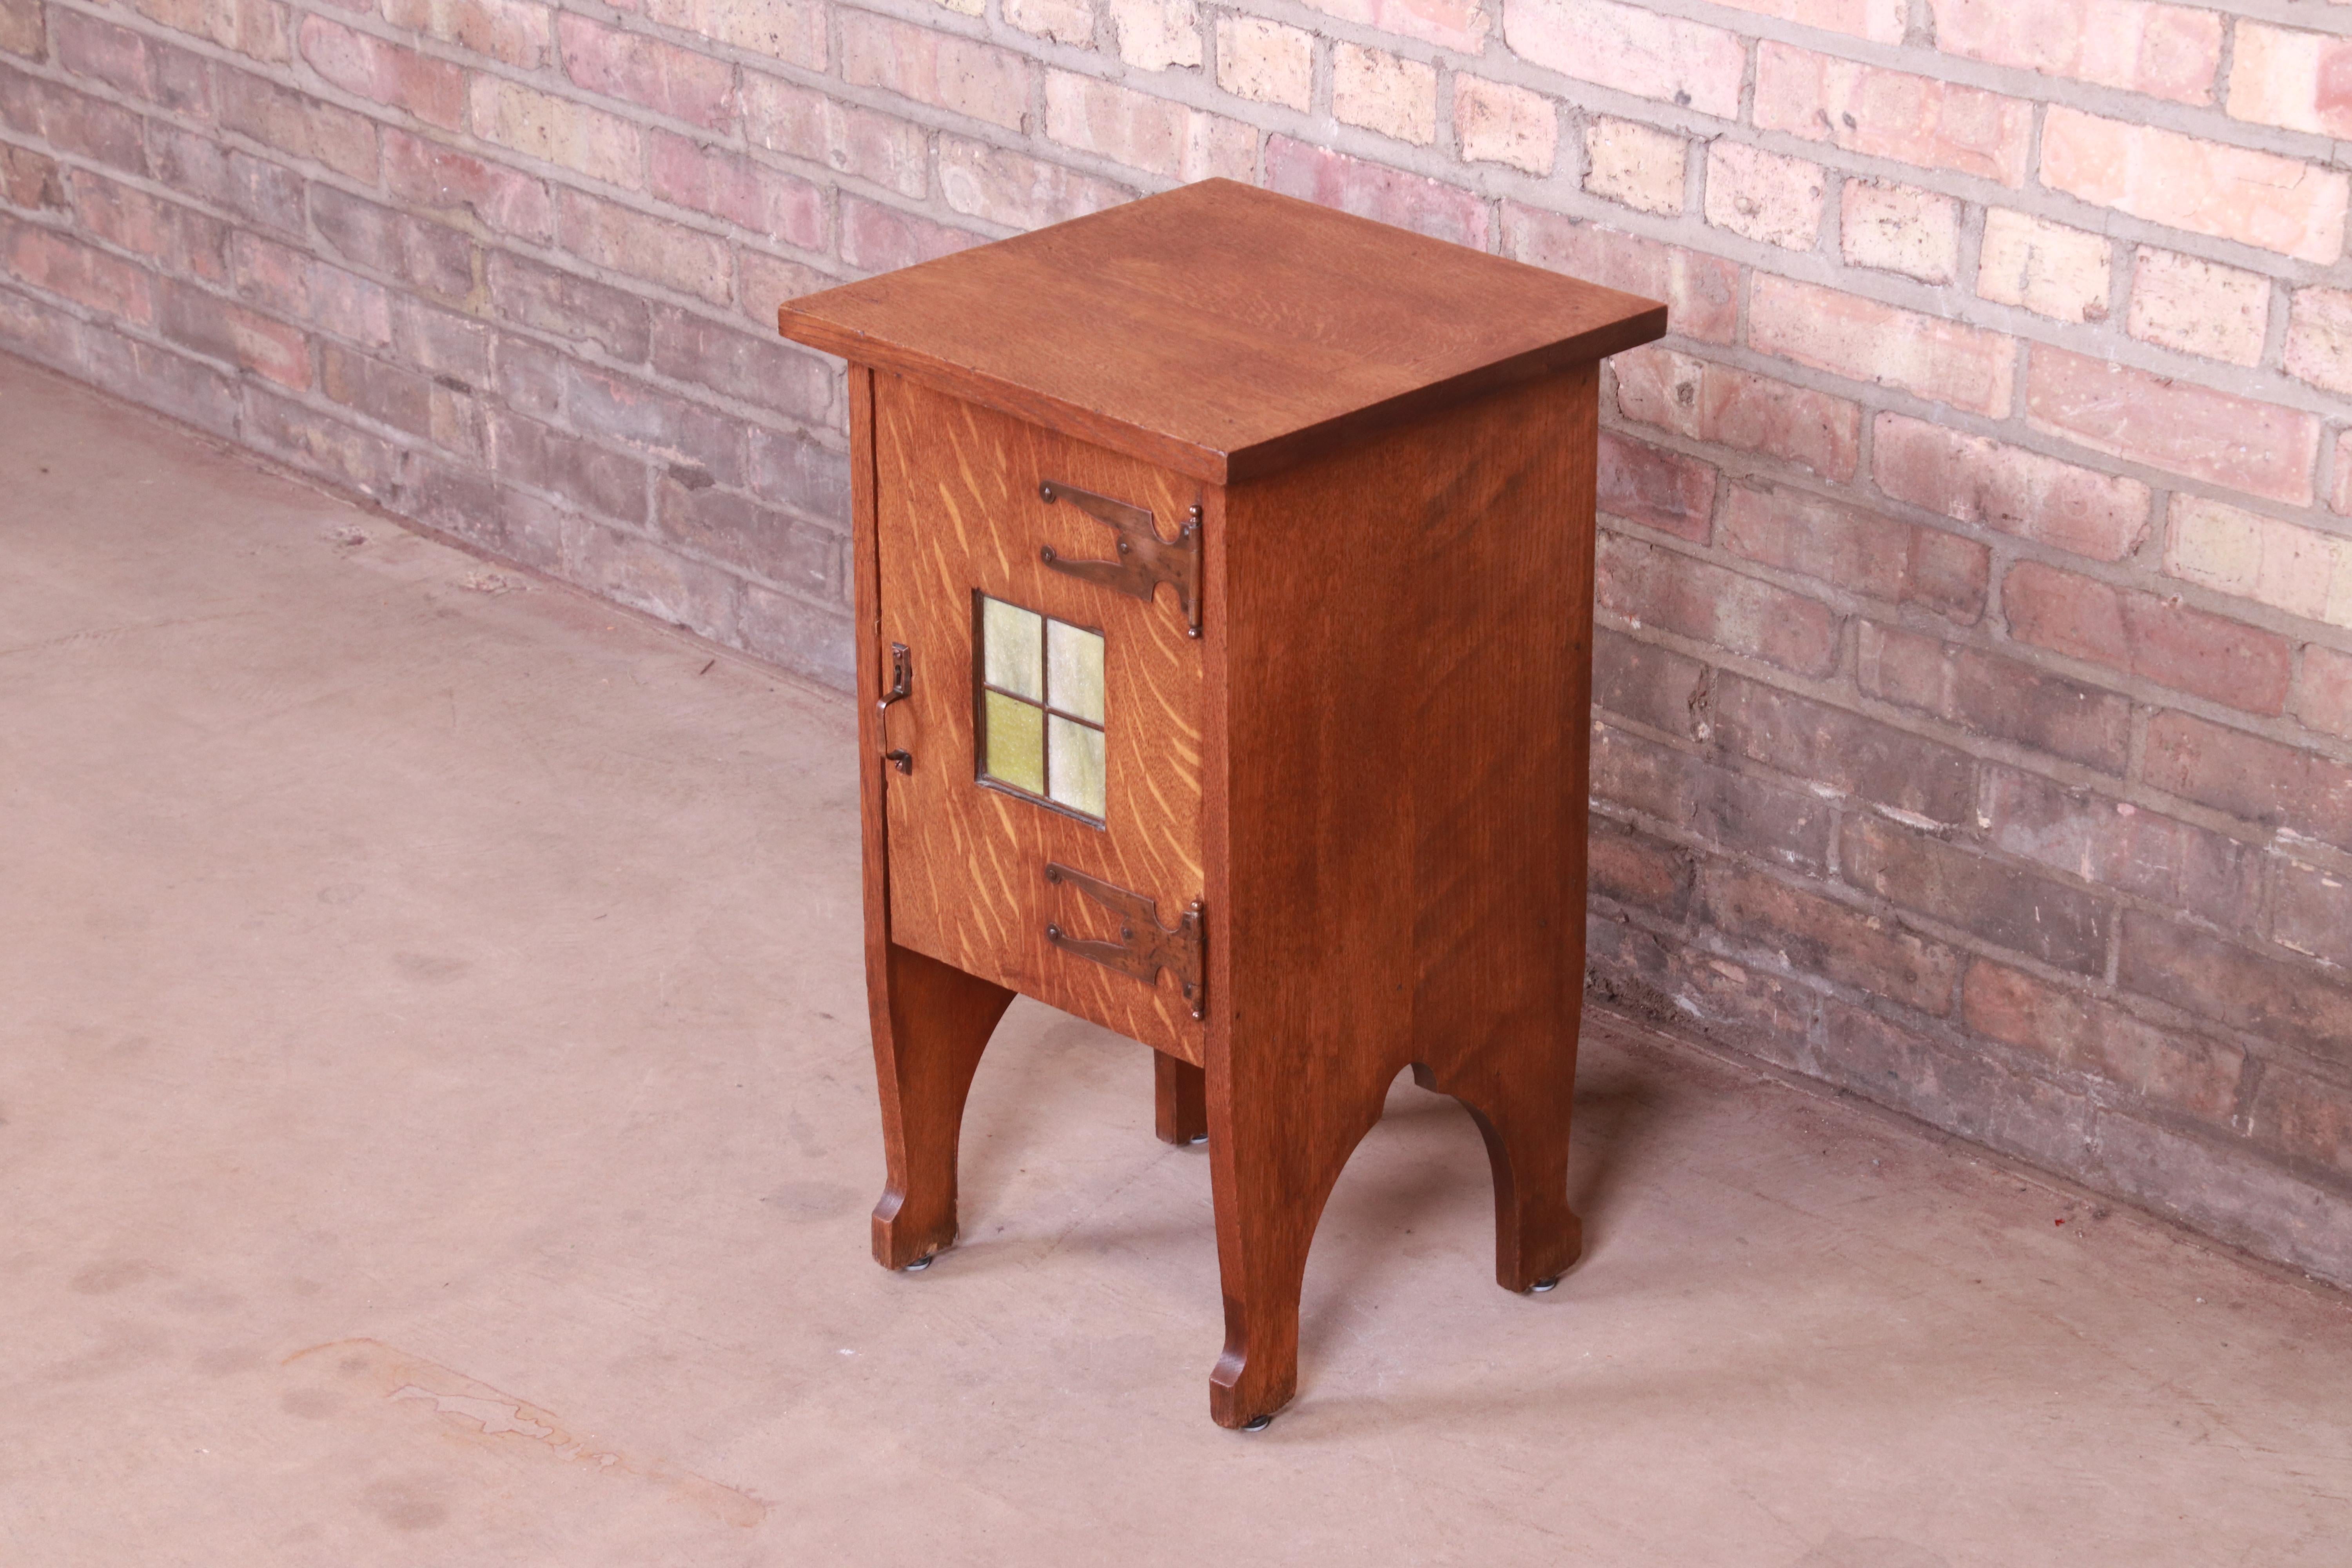 American Antique Arts & Crafts Oak Side Table with Stained Glass Tile Insert, circa 1900